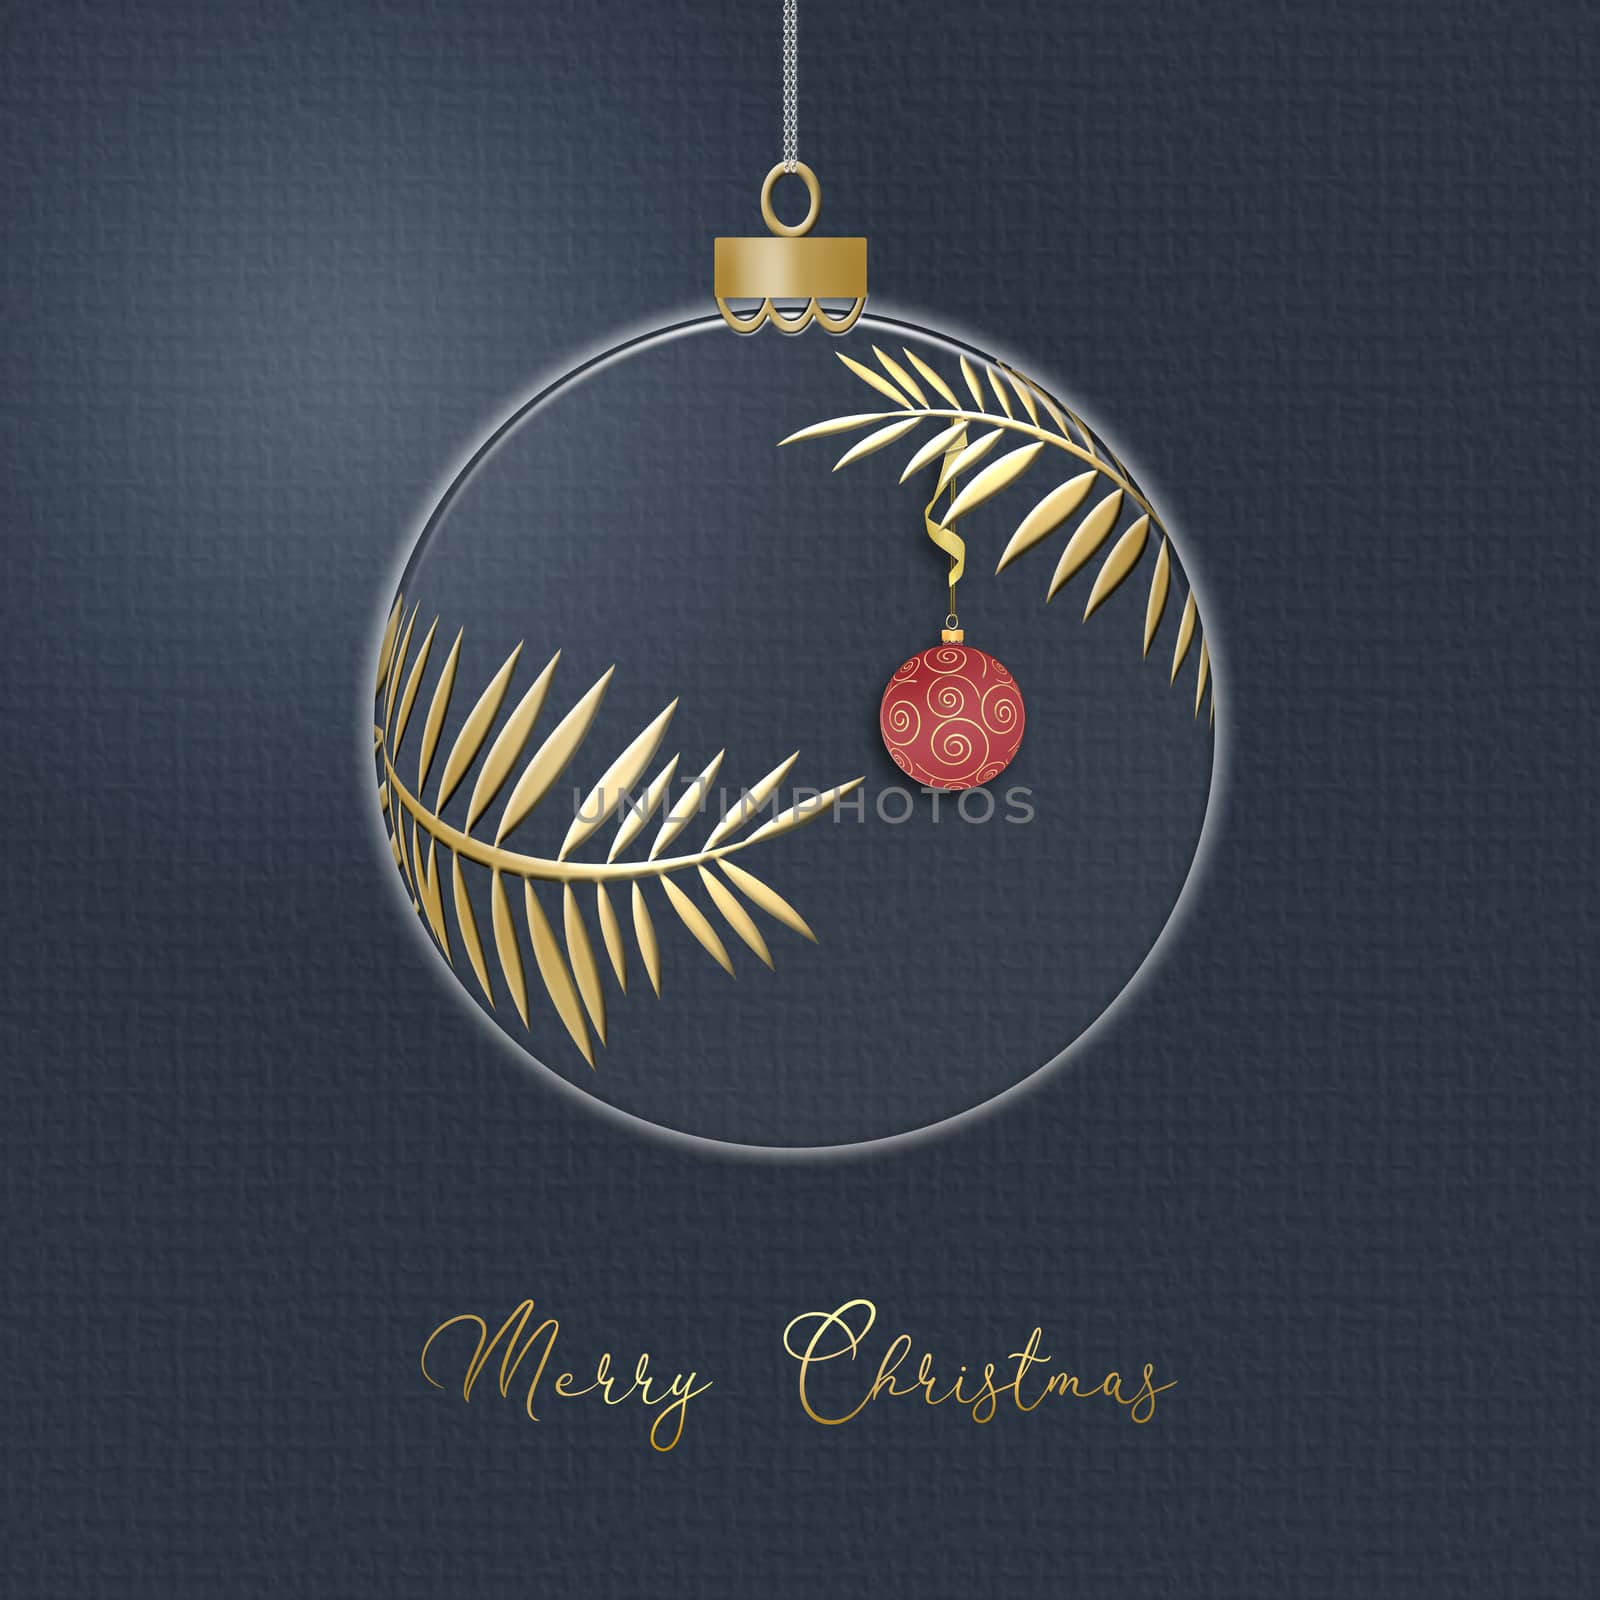 Hanging Christmas ball made of gold leaves with red lantern with gold ornament on blue background. Minimalist greeting 2021 New Year card. Merry Christmas text. 3D illustration